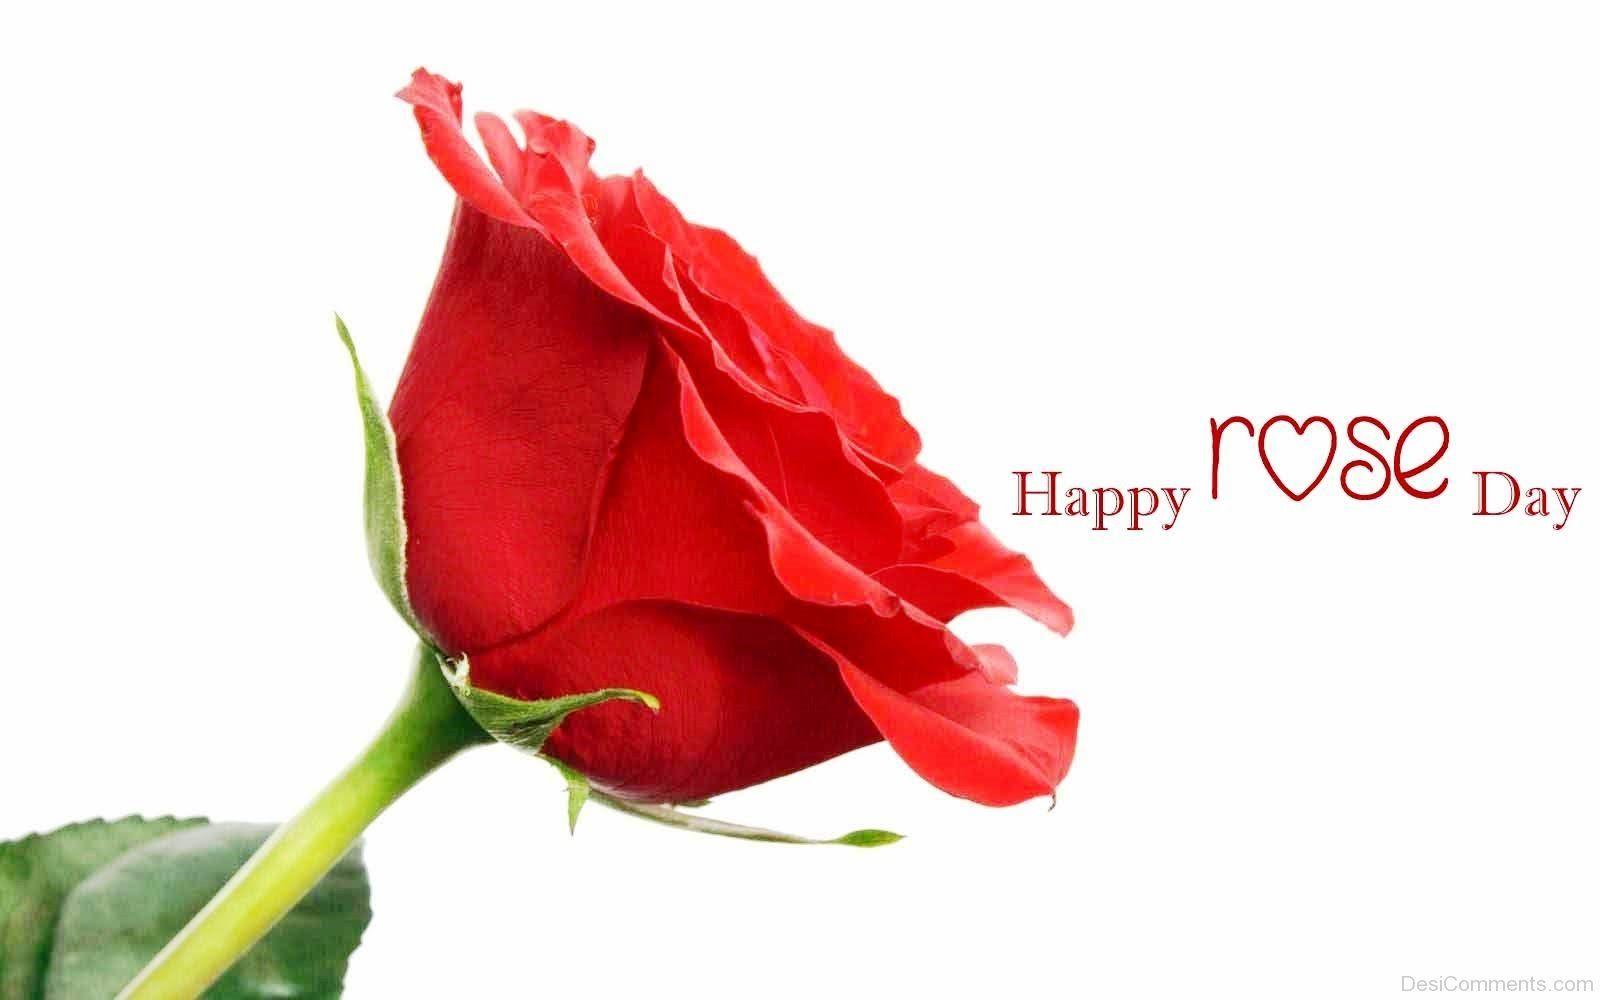 Rose Day Pictures, Image, Graphics for Facebook, Whatsapp